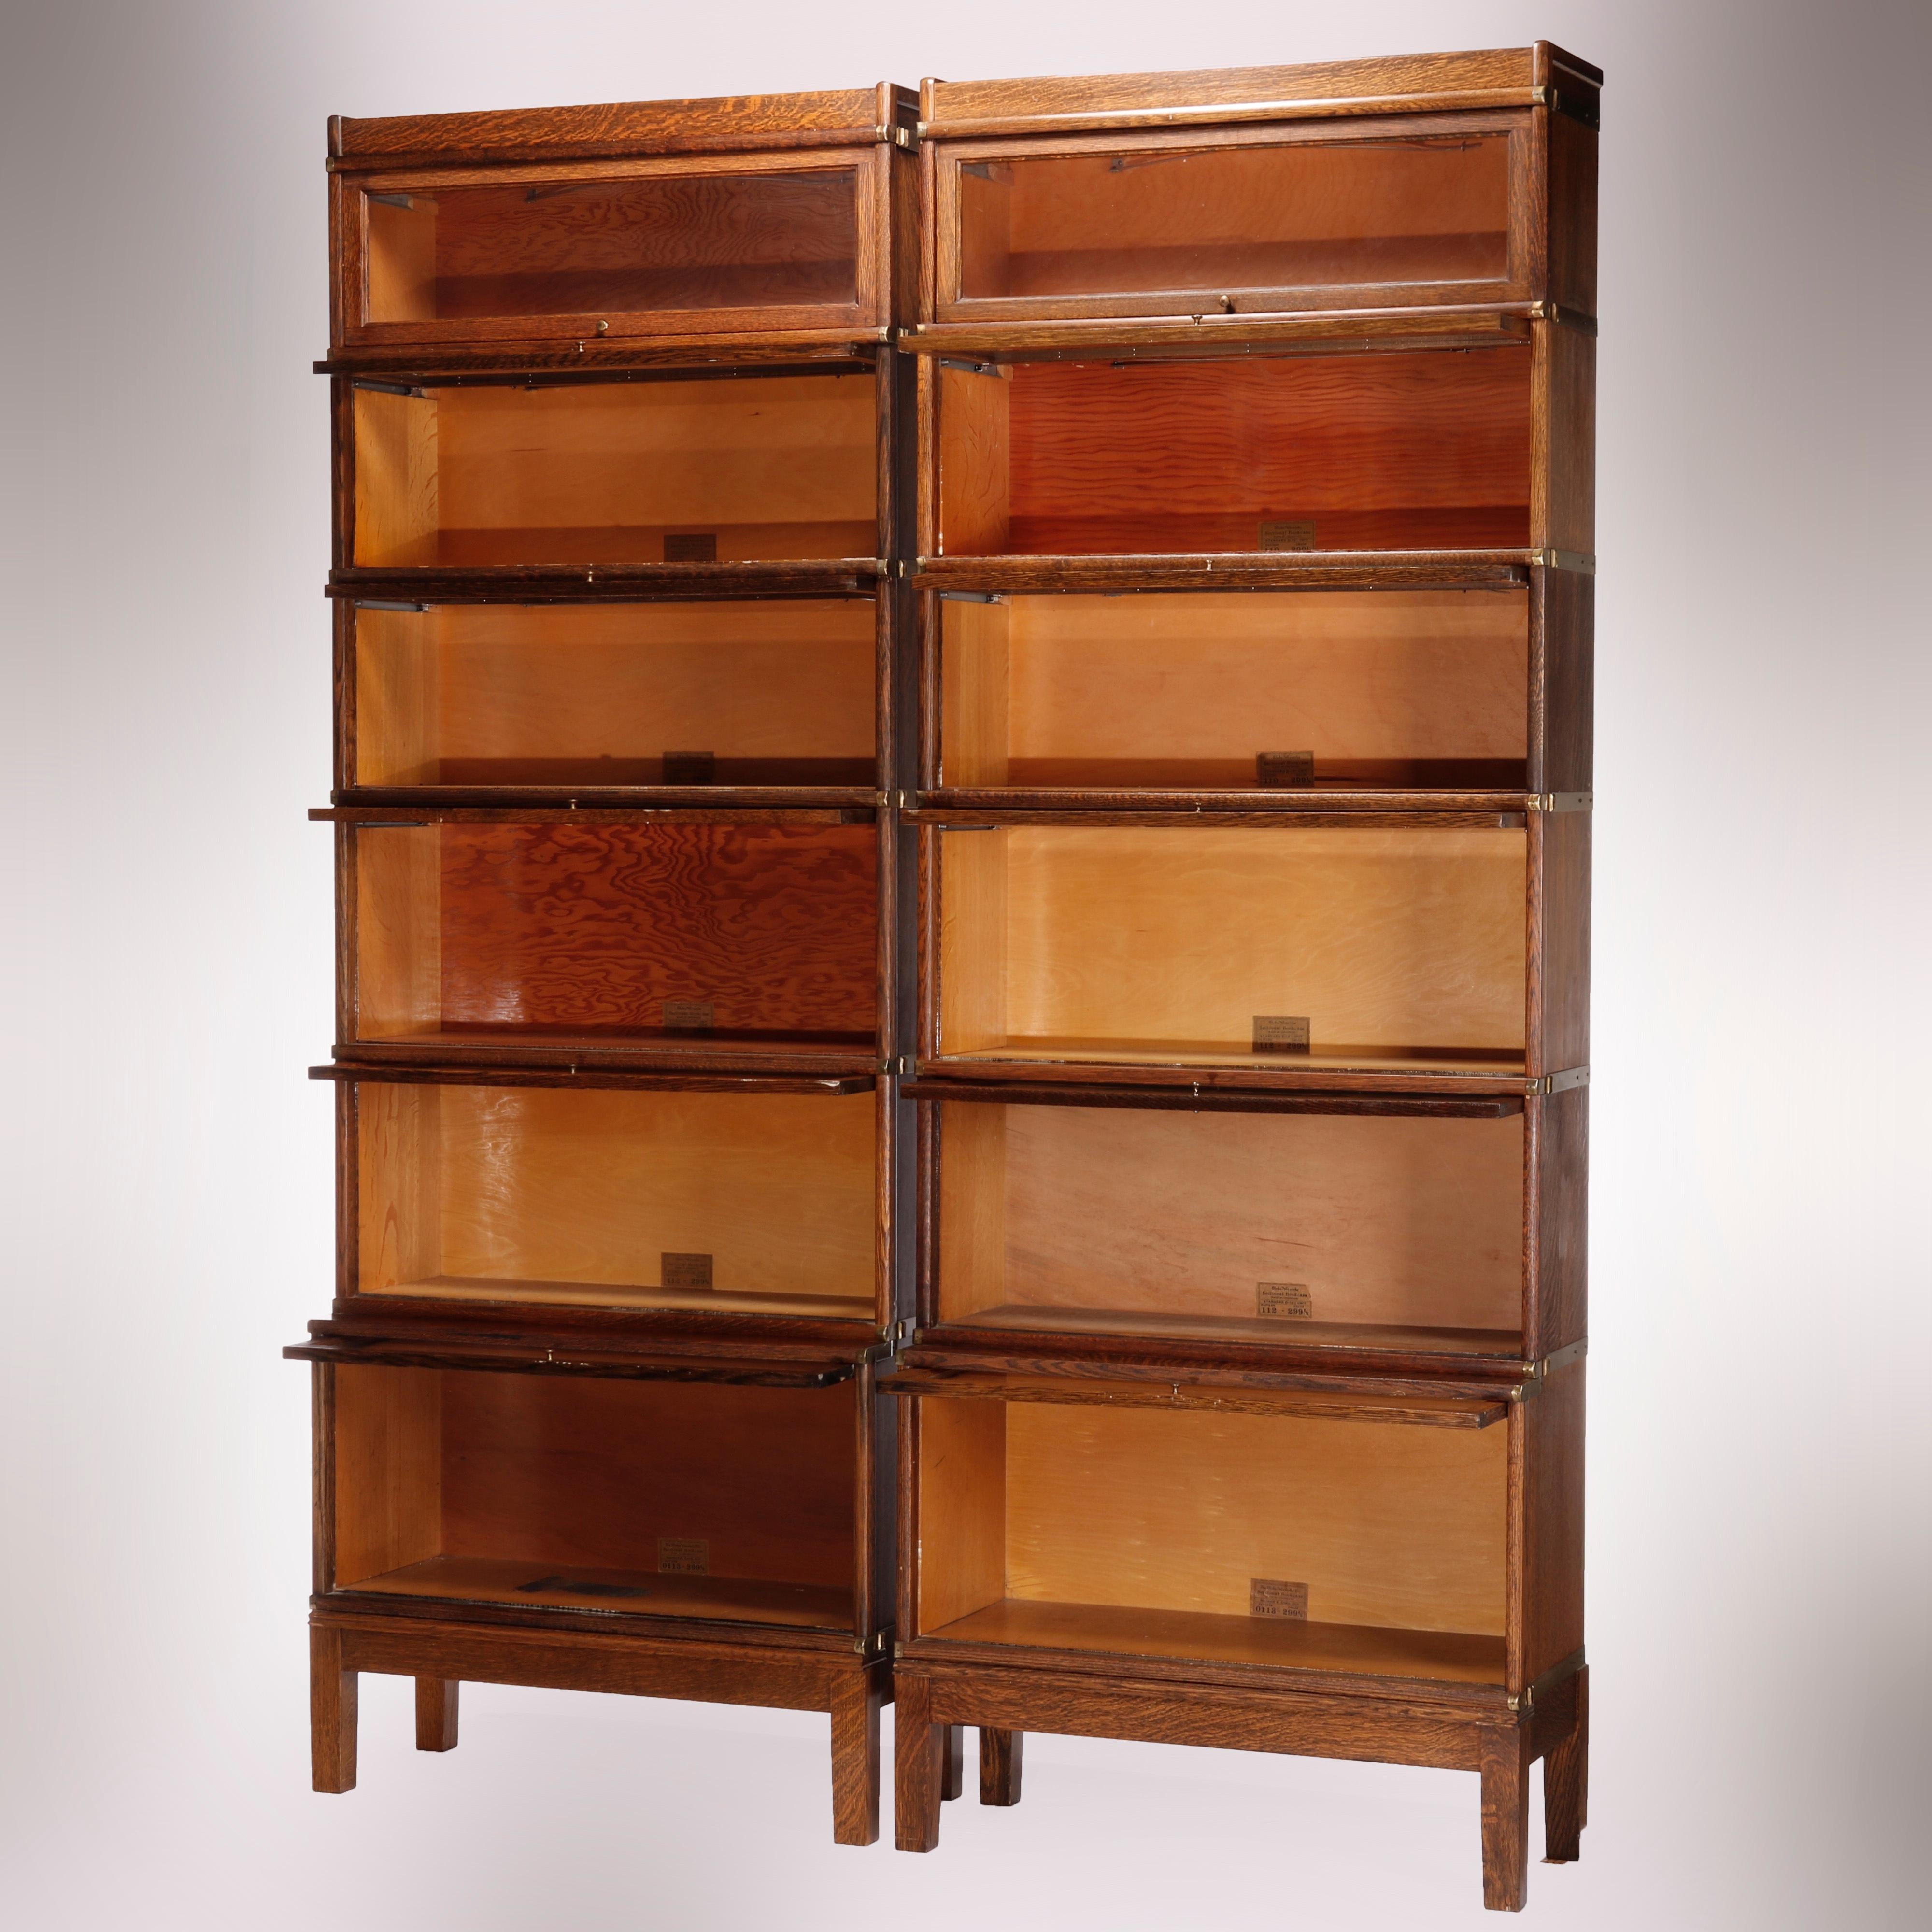 An antique pair of matching sectional barrister bookcases by Globe Wernicke offers quarter sawn oak construction, each with six stacks having pull out glass doors and raised on square and straight legs, maker labels as photographed,